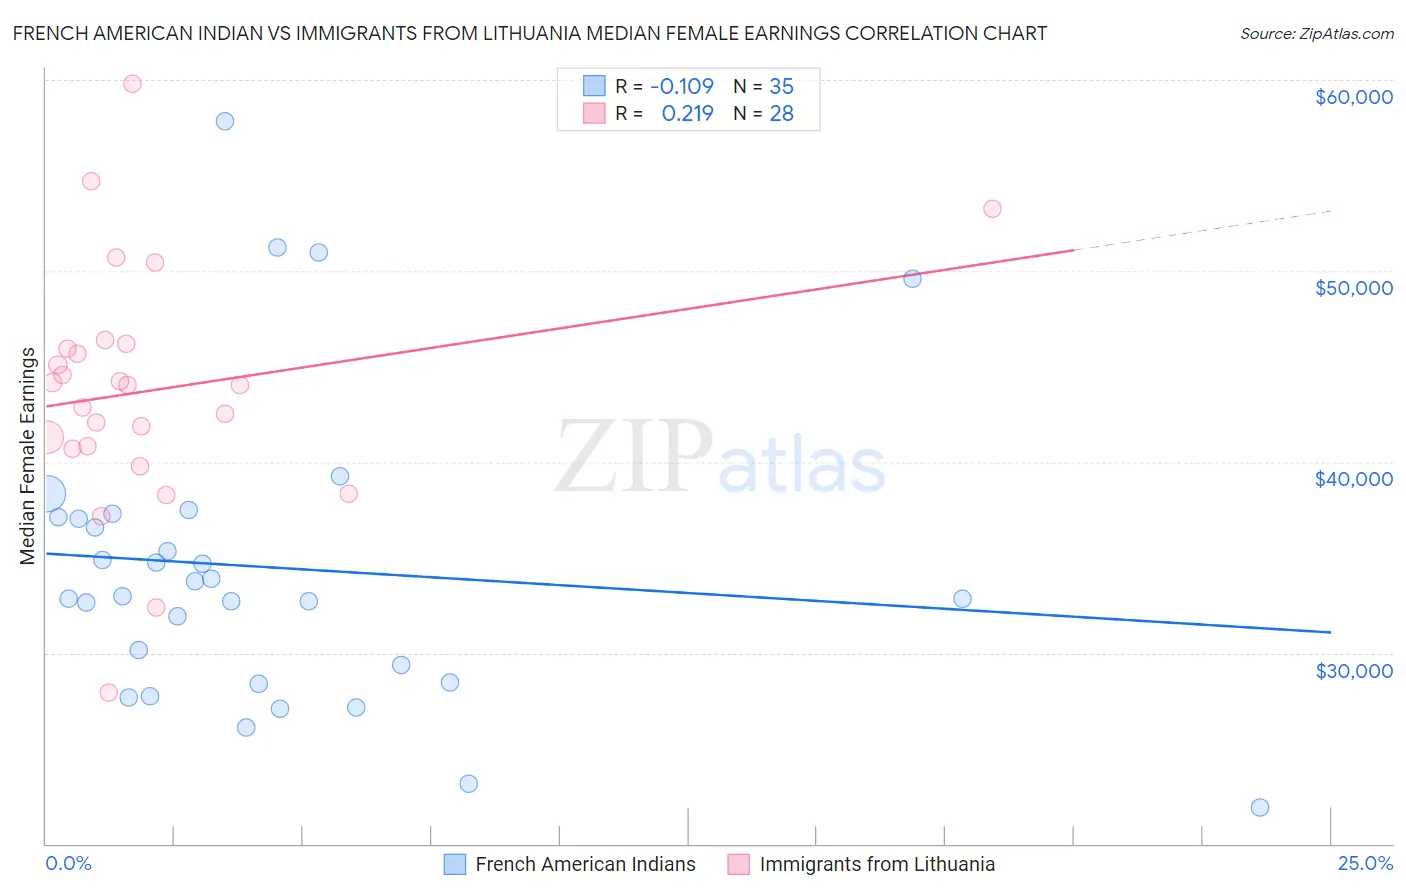 French American Indian vs Immigrants from Lithuania Median Female Earnings